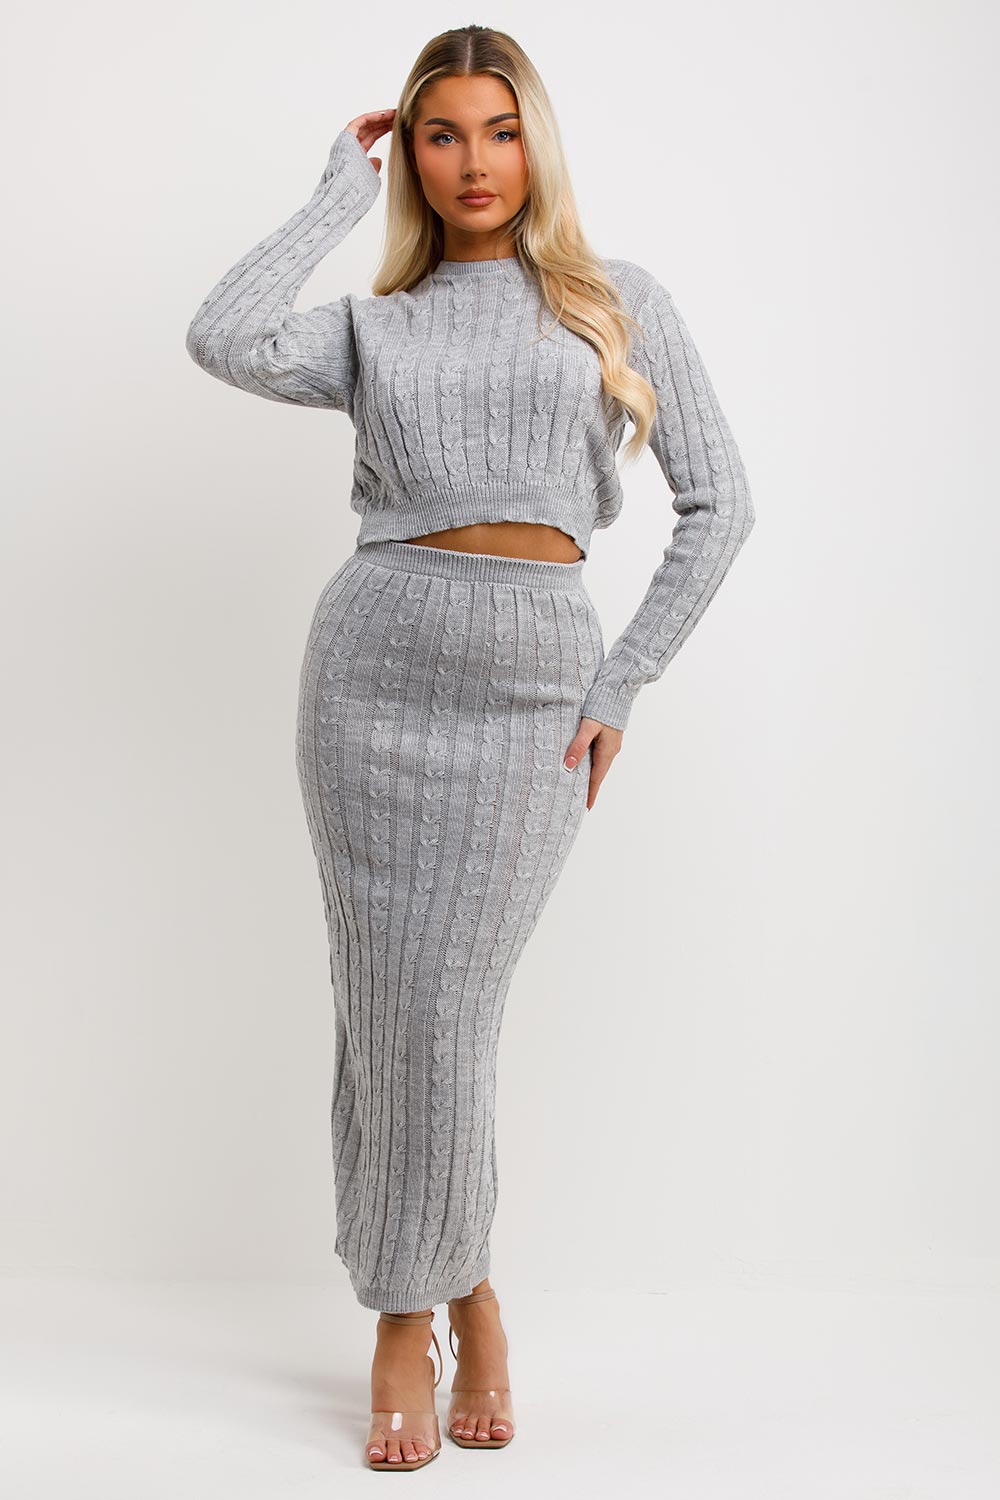 womens knitted maxi skirt and crop knitted jumper top two piece set going out winter outfit